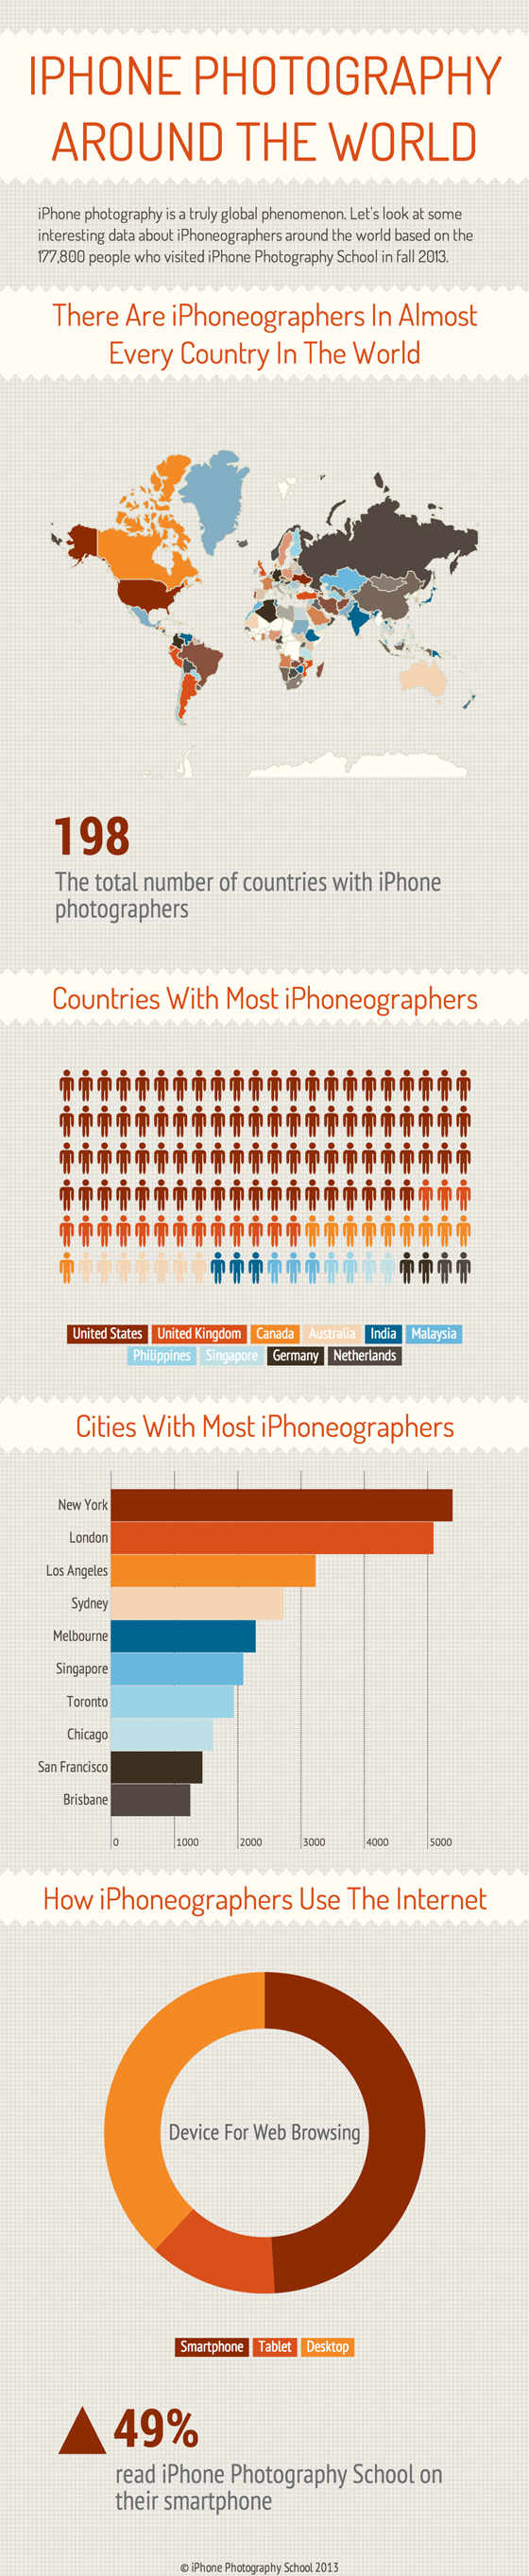 iPhone-Photography-Infographic